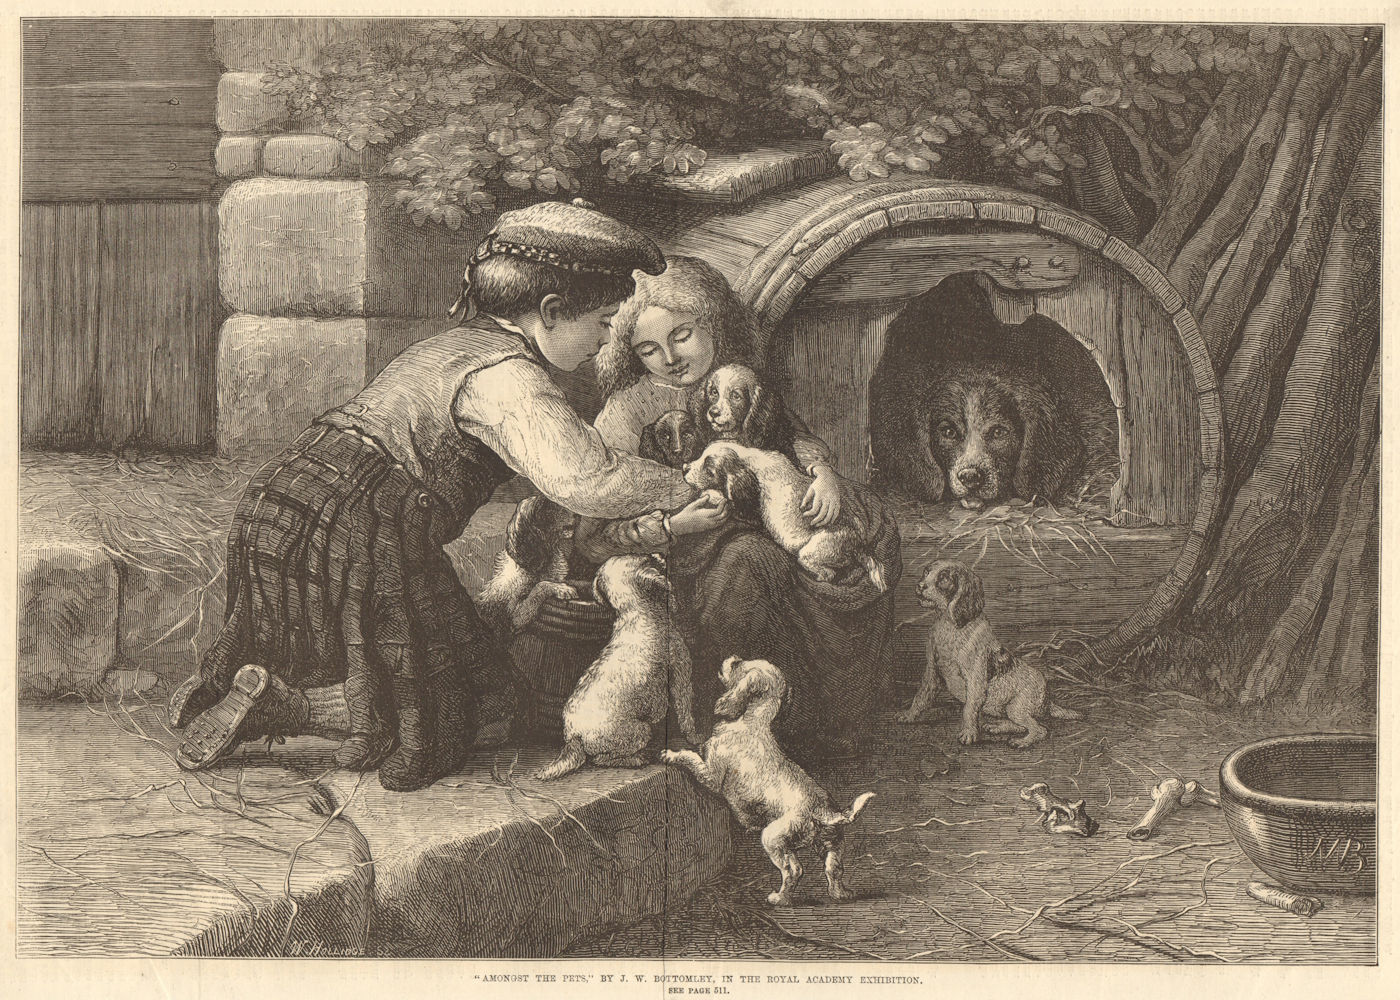 Associate Product "Amongst the pets", by J. W. Bottomley. Puppies Family Dogs 1870 ILN full page